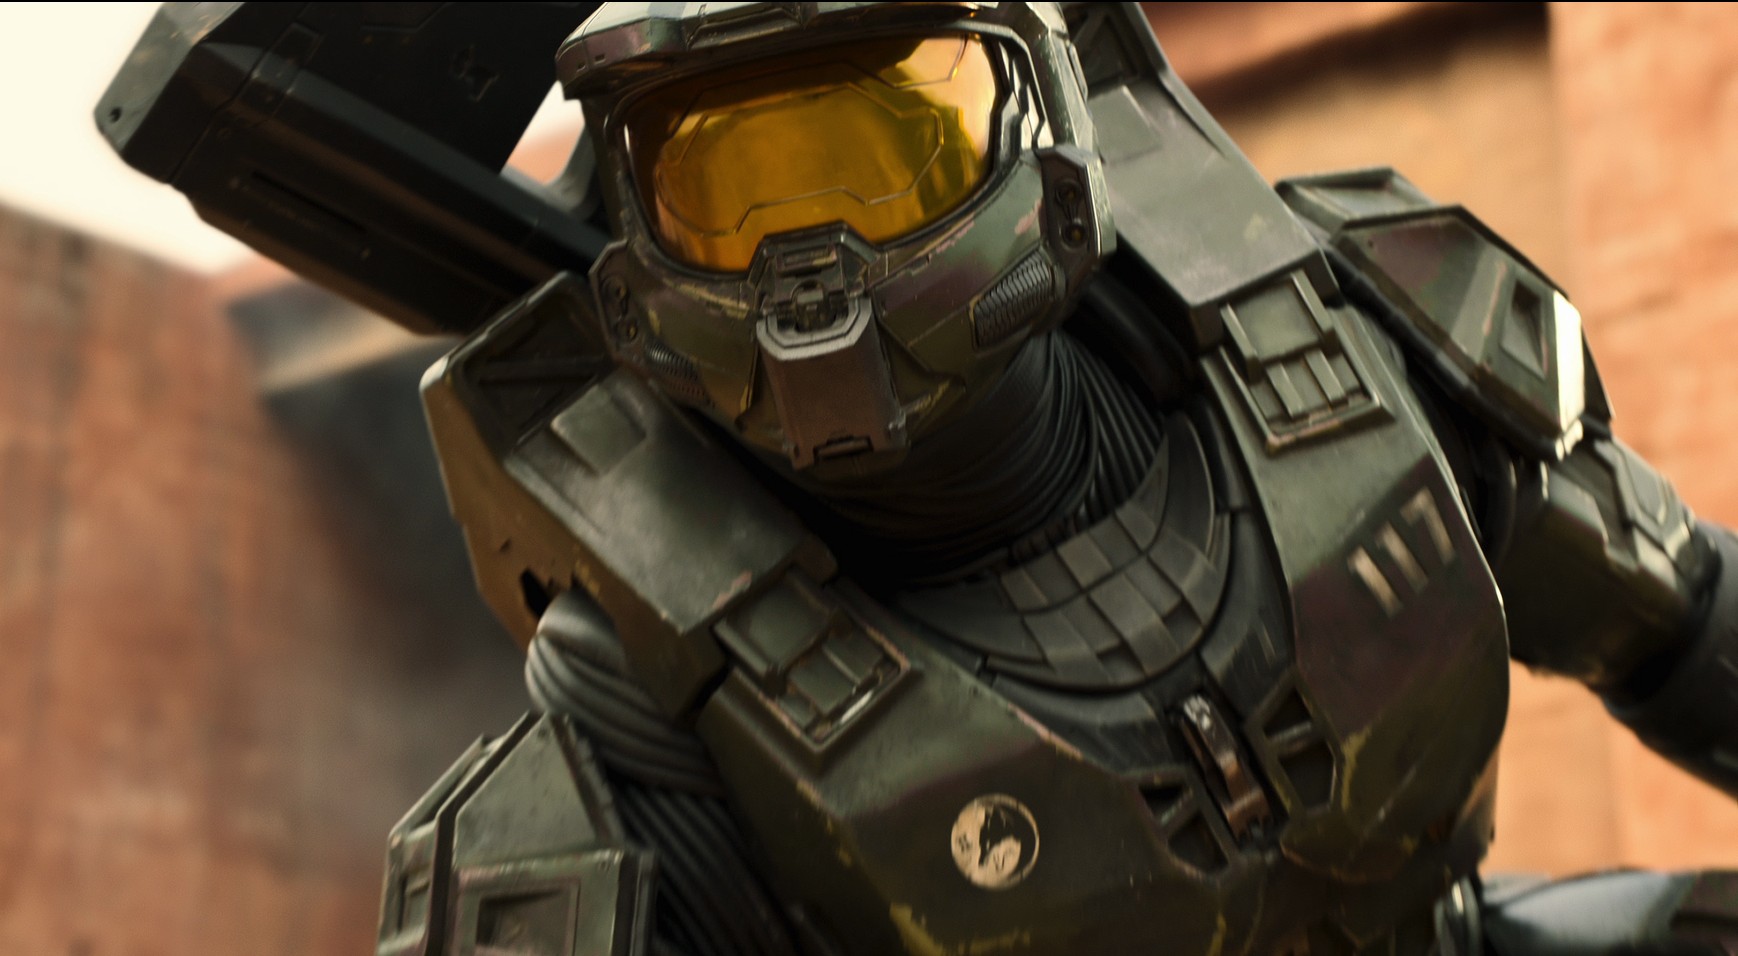 Halo TV Series Episode 1: Contact Review - On Tap Sports Net